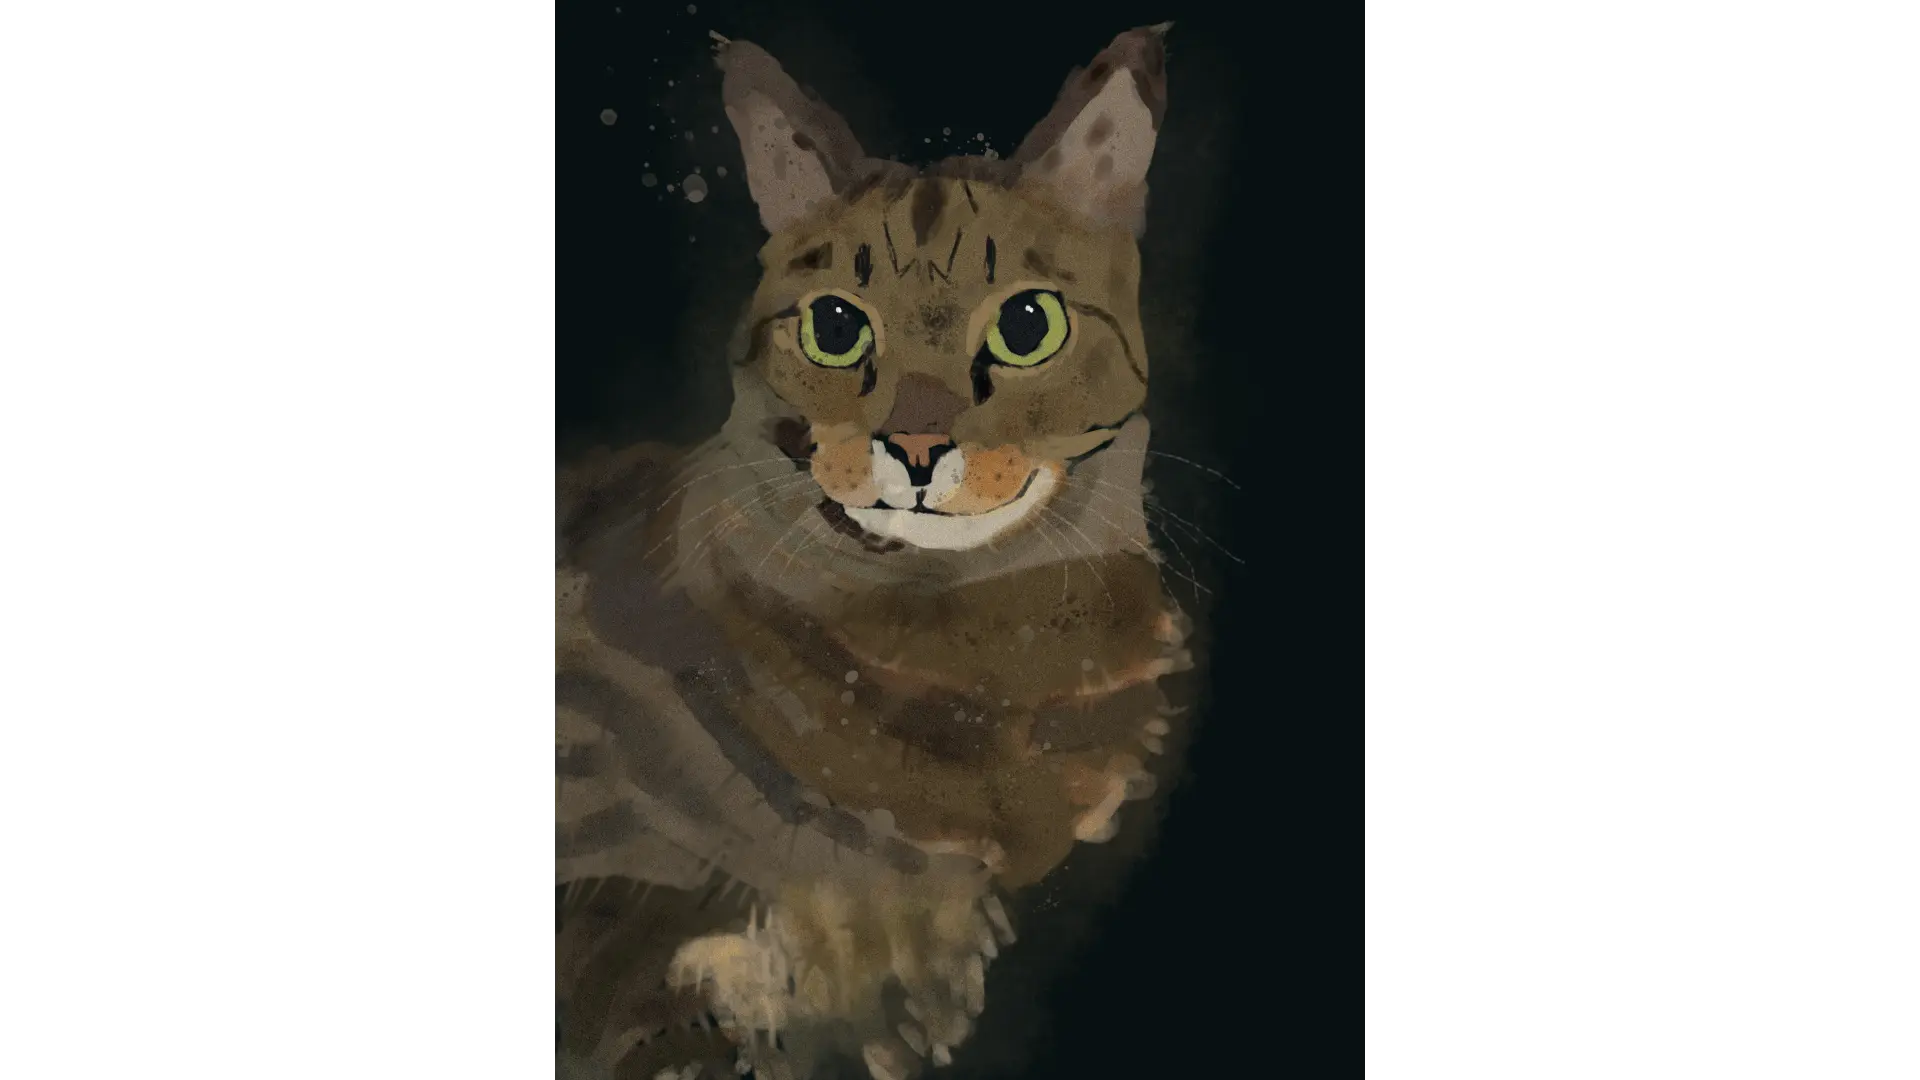 A digital painting of a tabby cat.